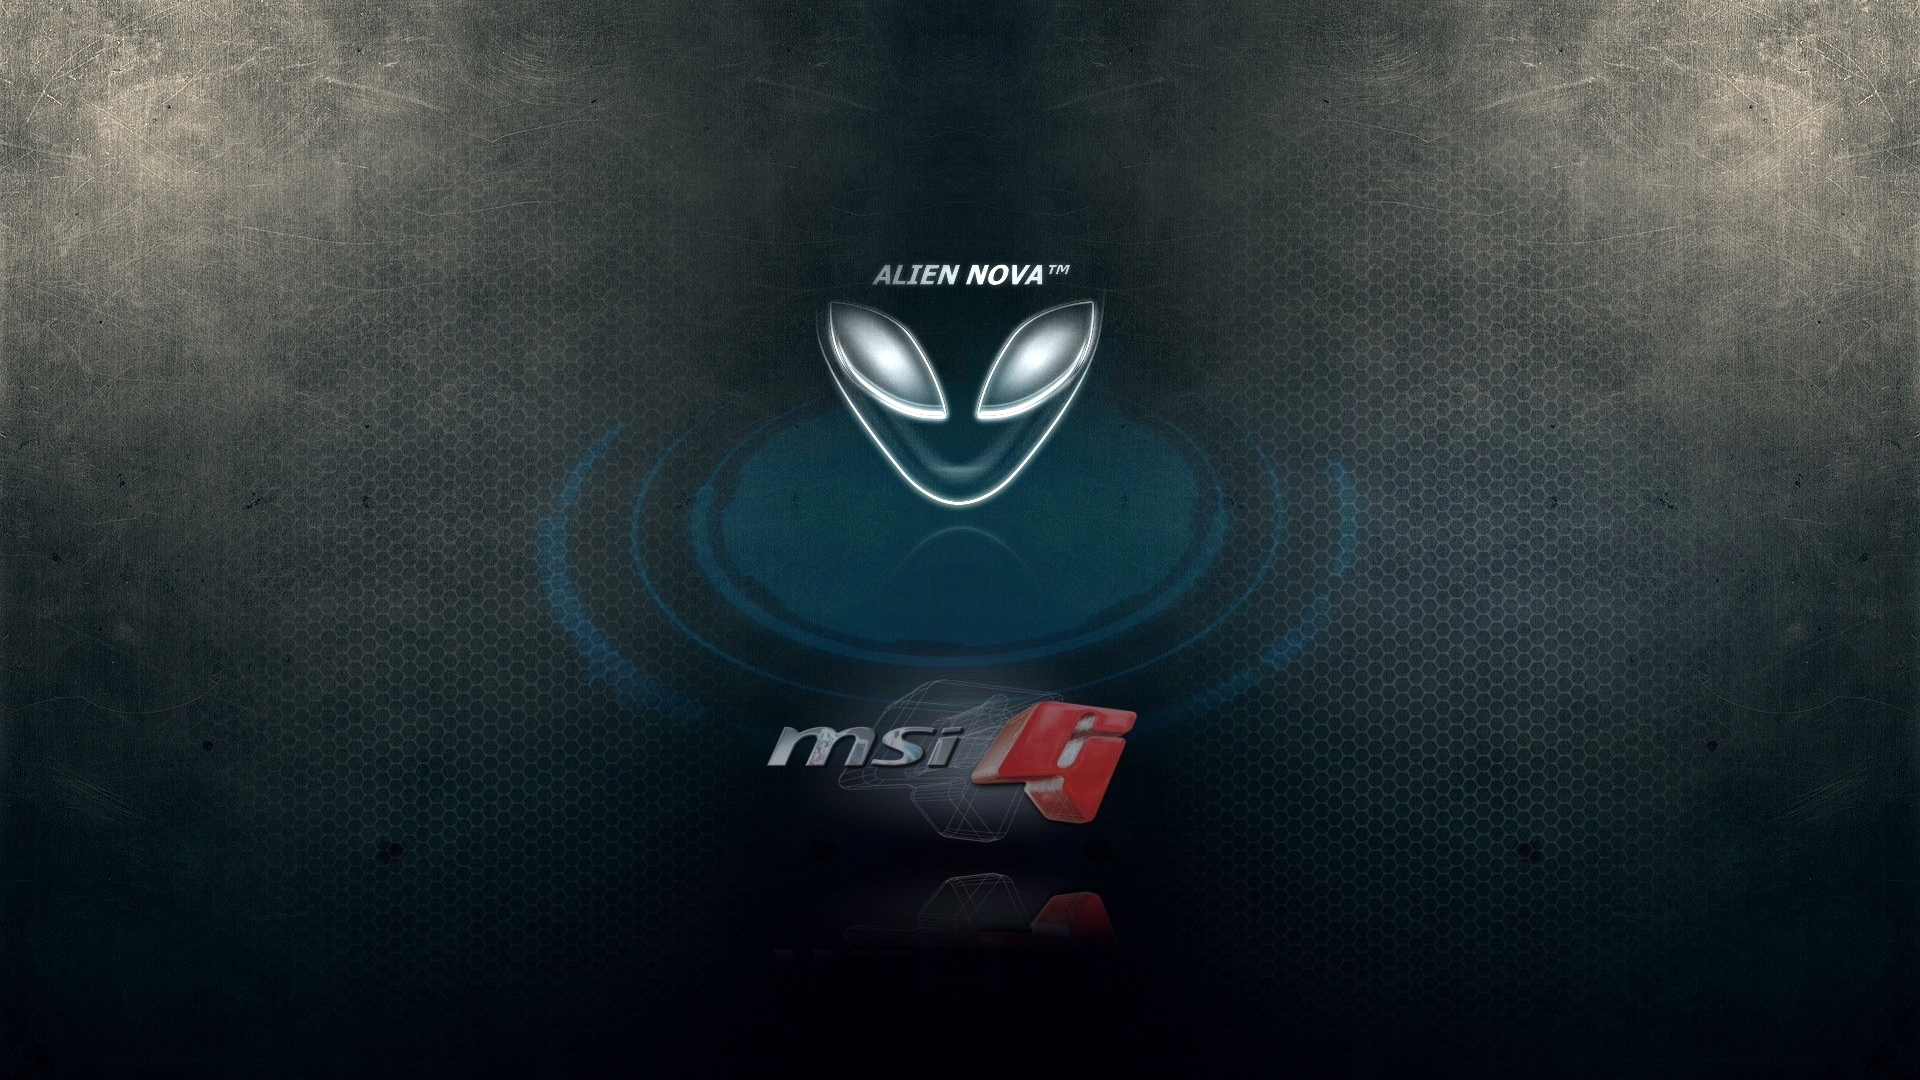 alienware and MSi g logo hd 1920x1080 1080p wallpaper compatible for